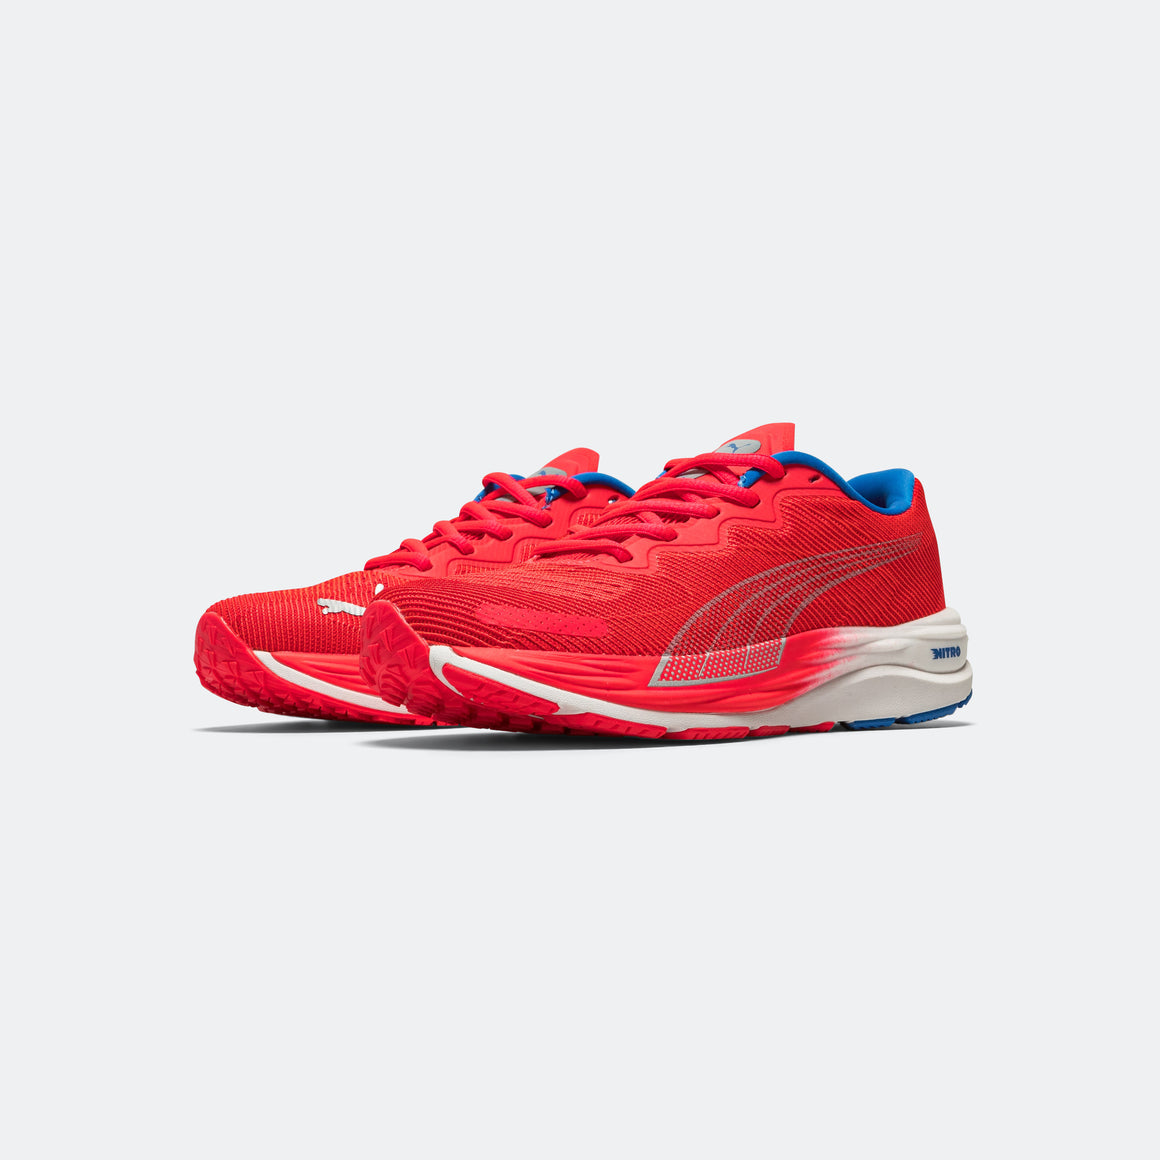 Puma - Womens Velocity Nitro 2 - Fire Orchid - Up There Athletics